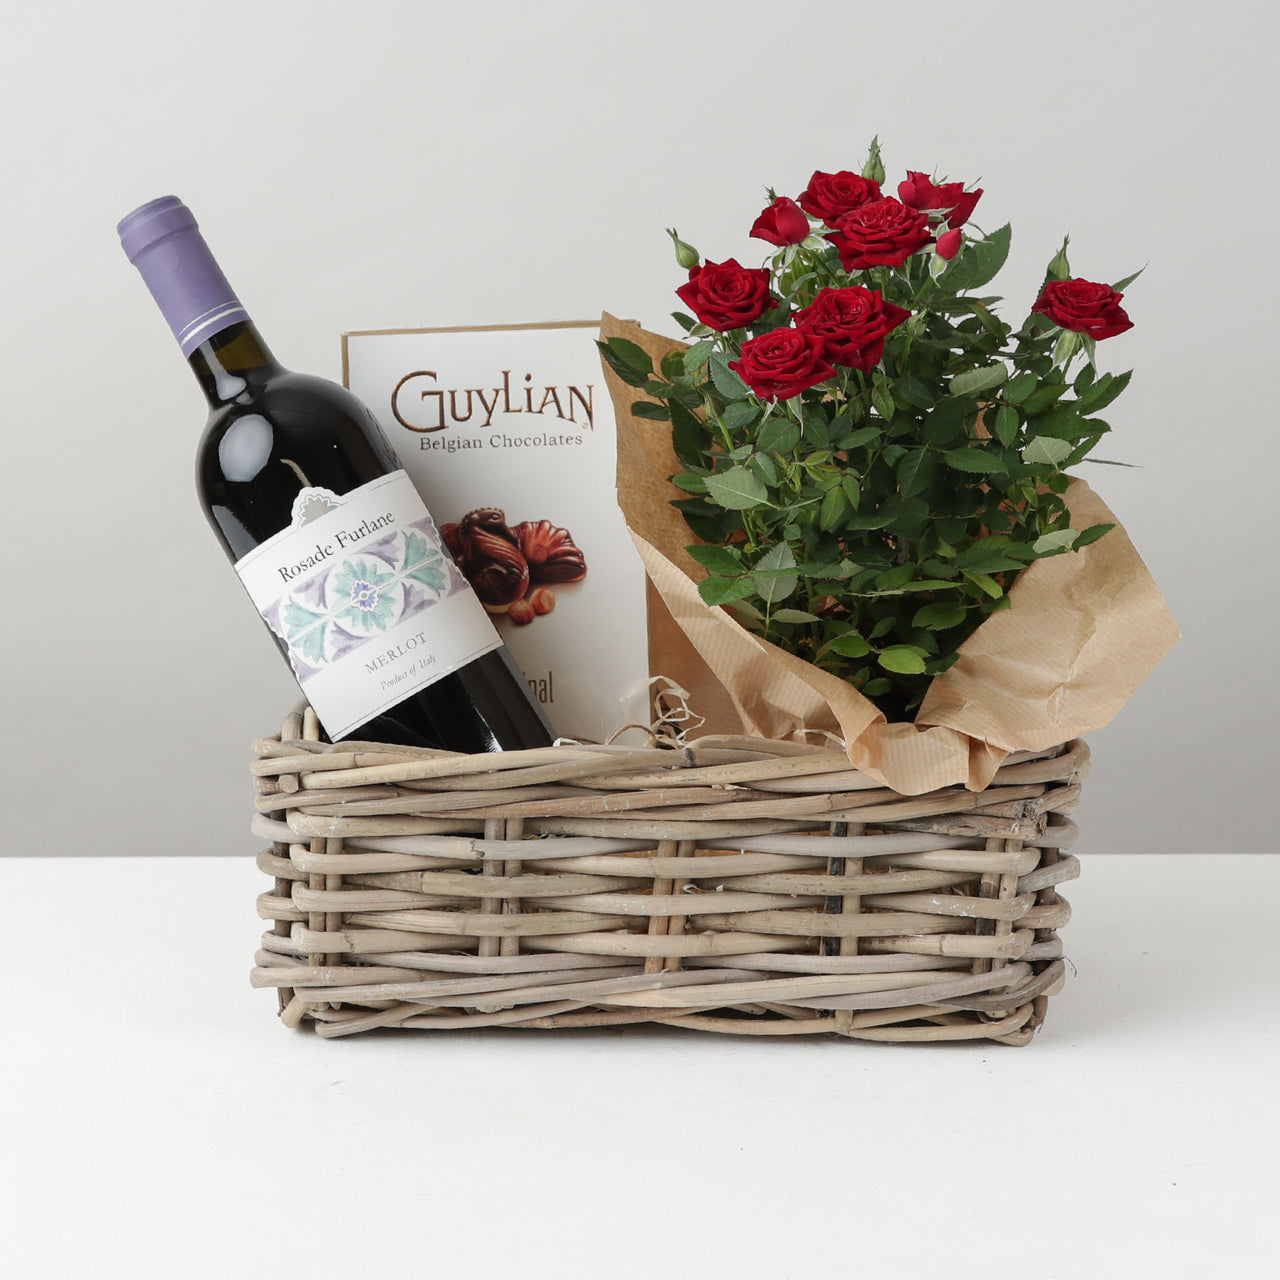 Red Wine and Rose Plant Hamper